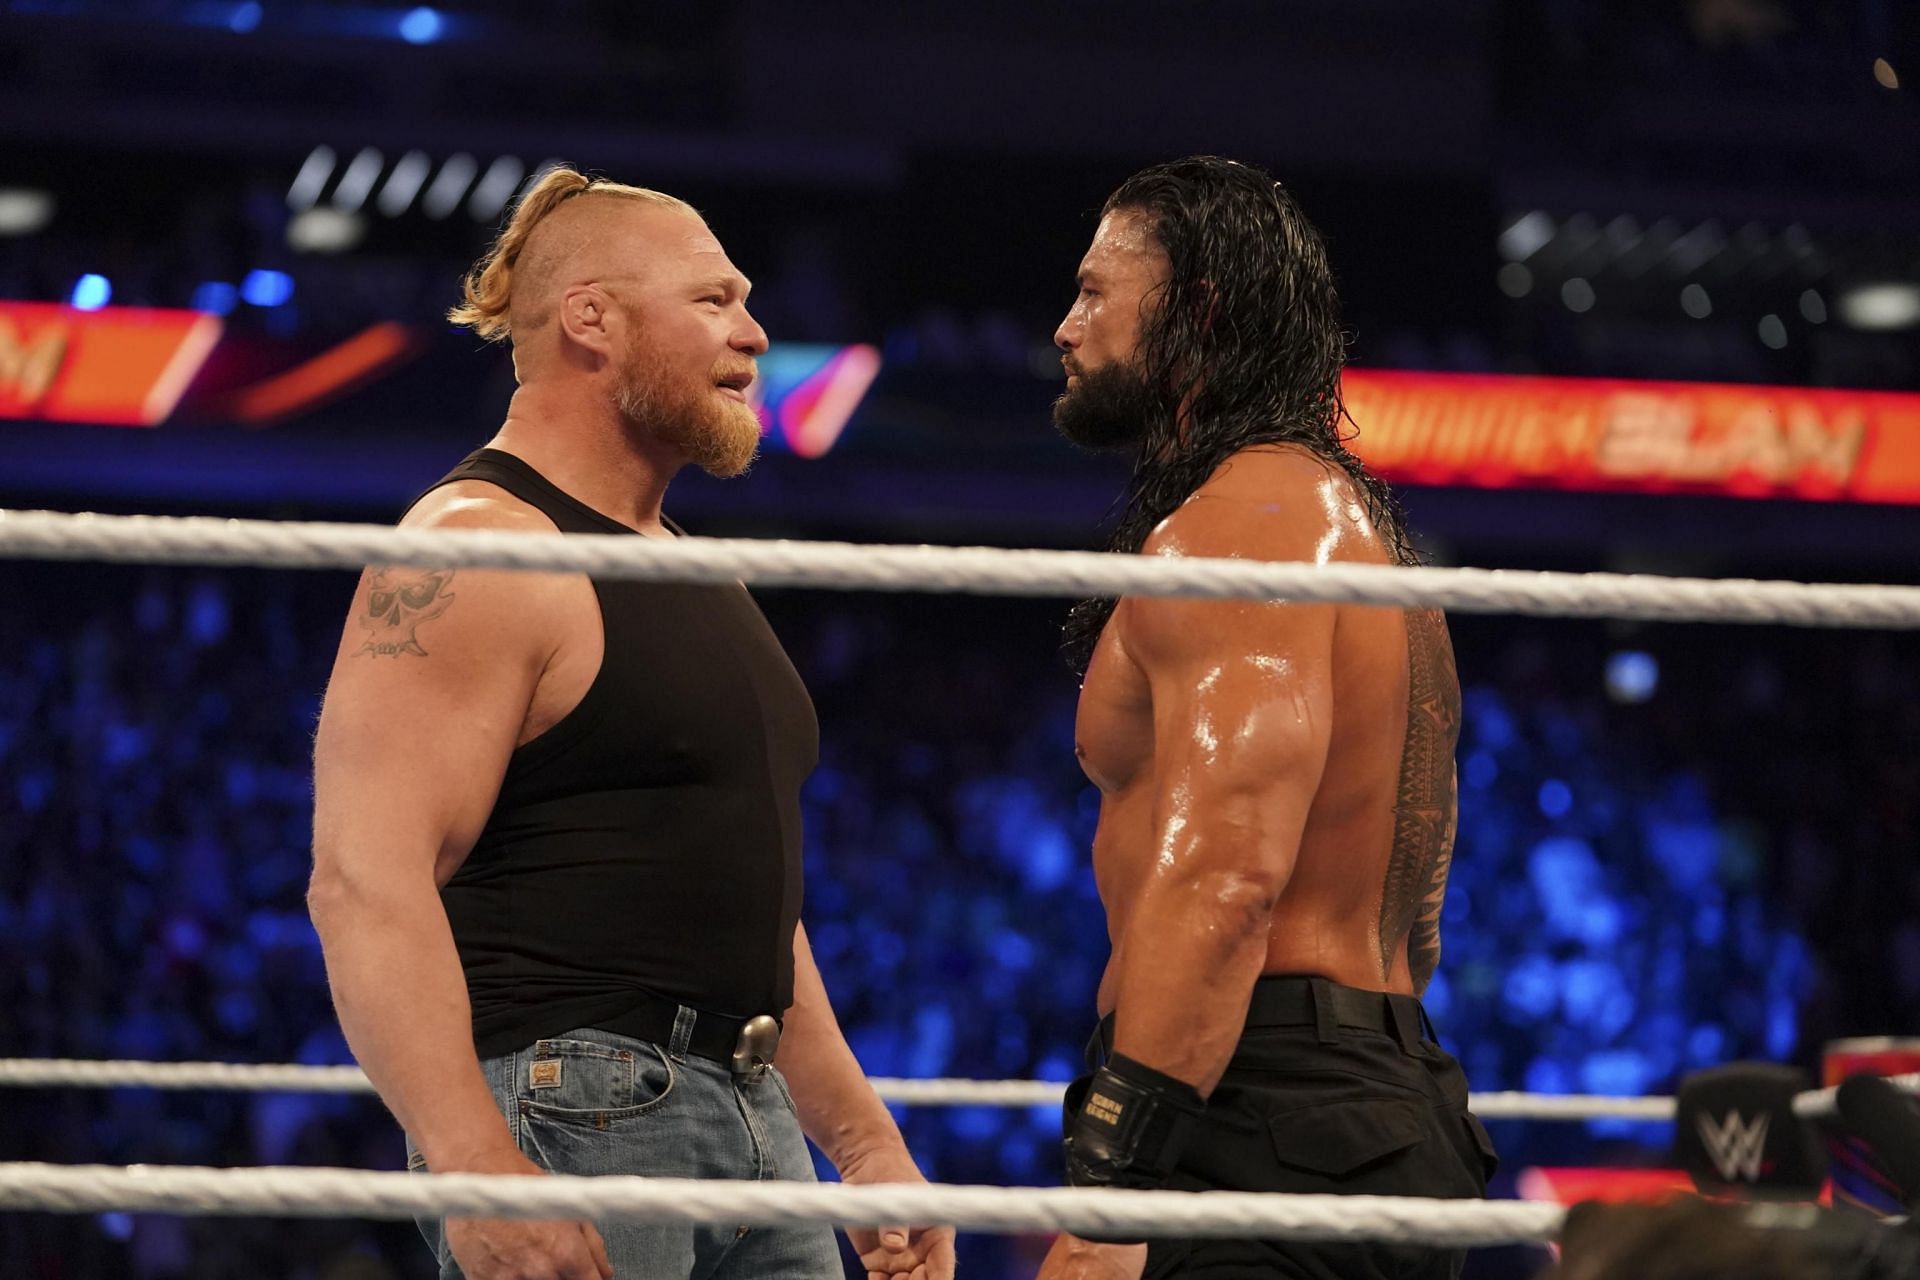 Roman Reigns will defend his title against Brock Lesnar at SummerSlam, 2022